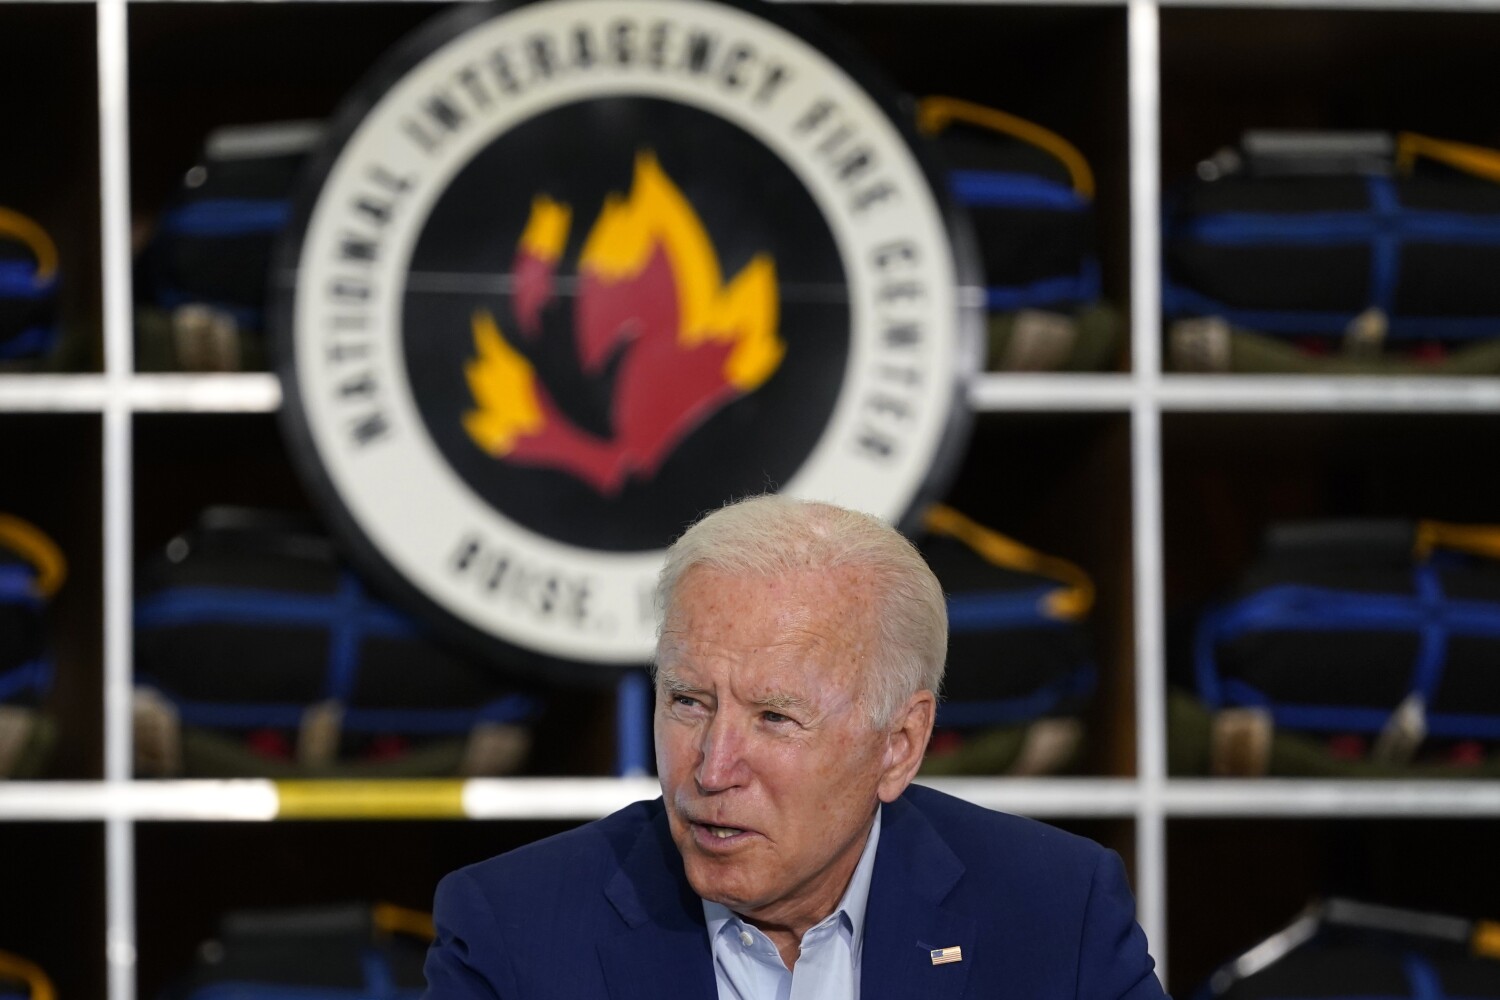 Biden will confront the issue of wildfire danger during California trip